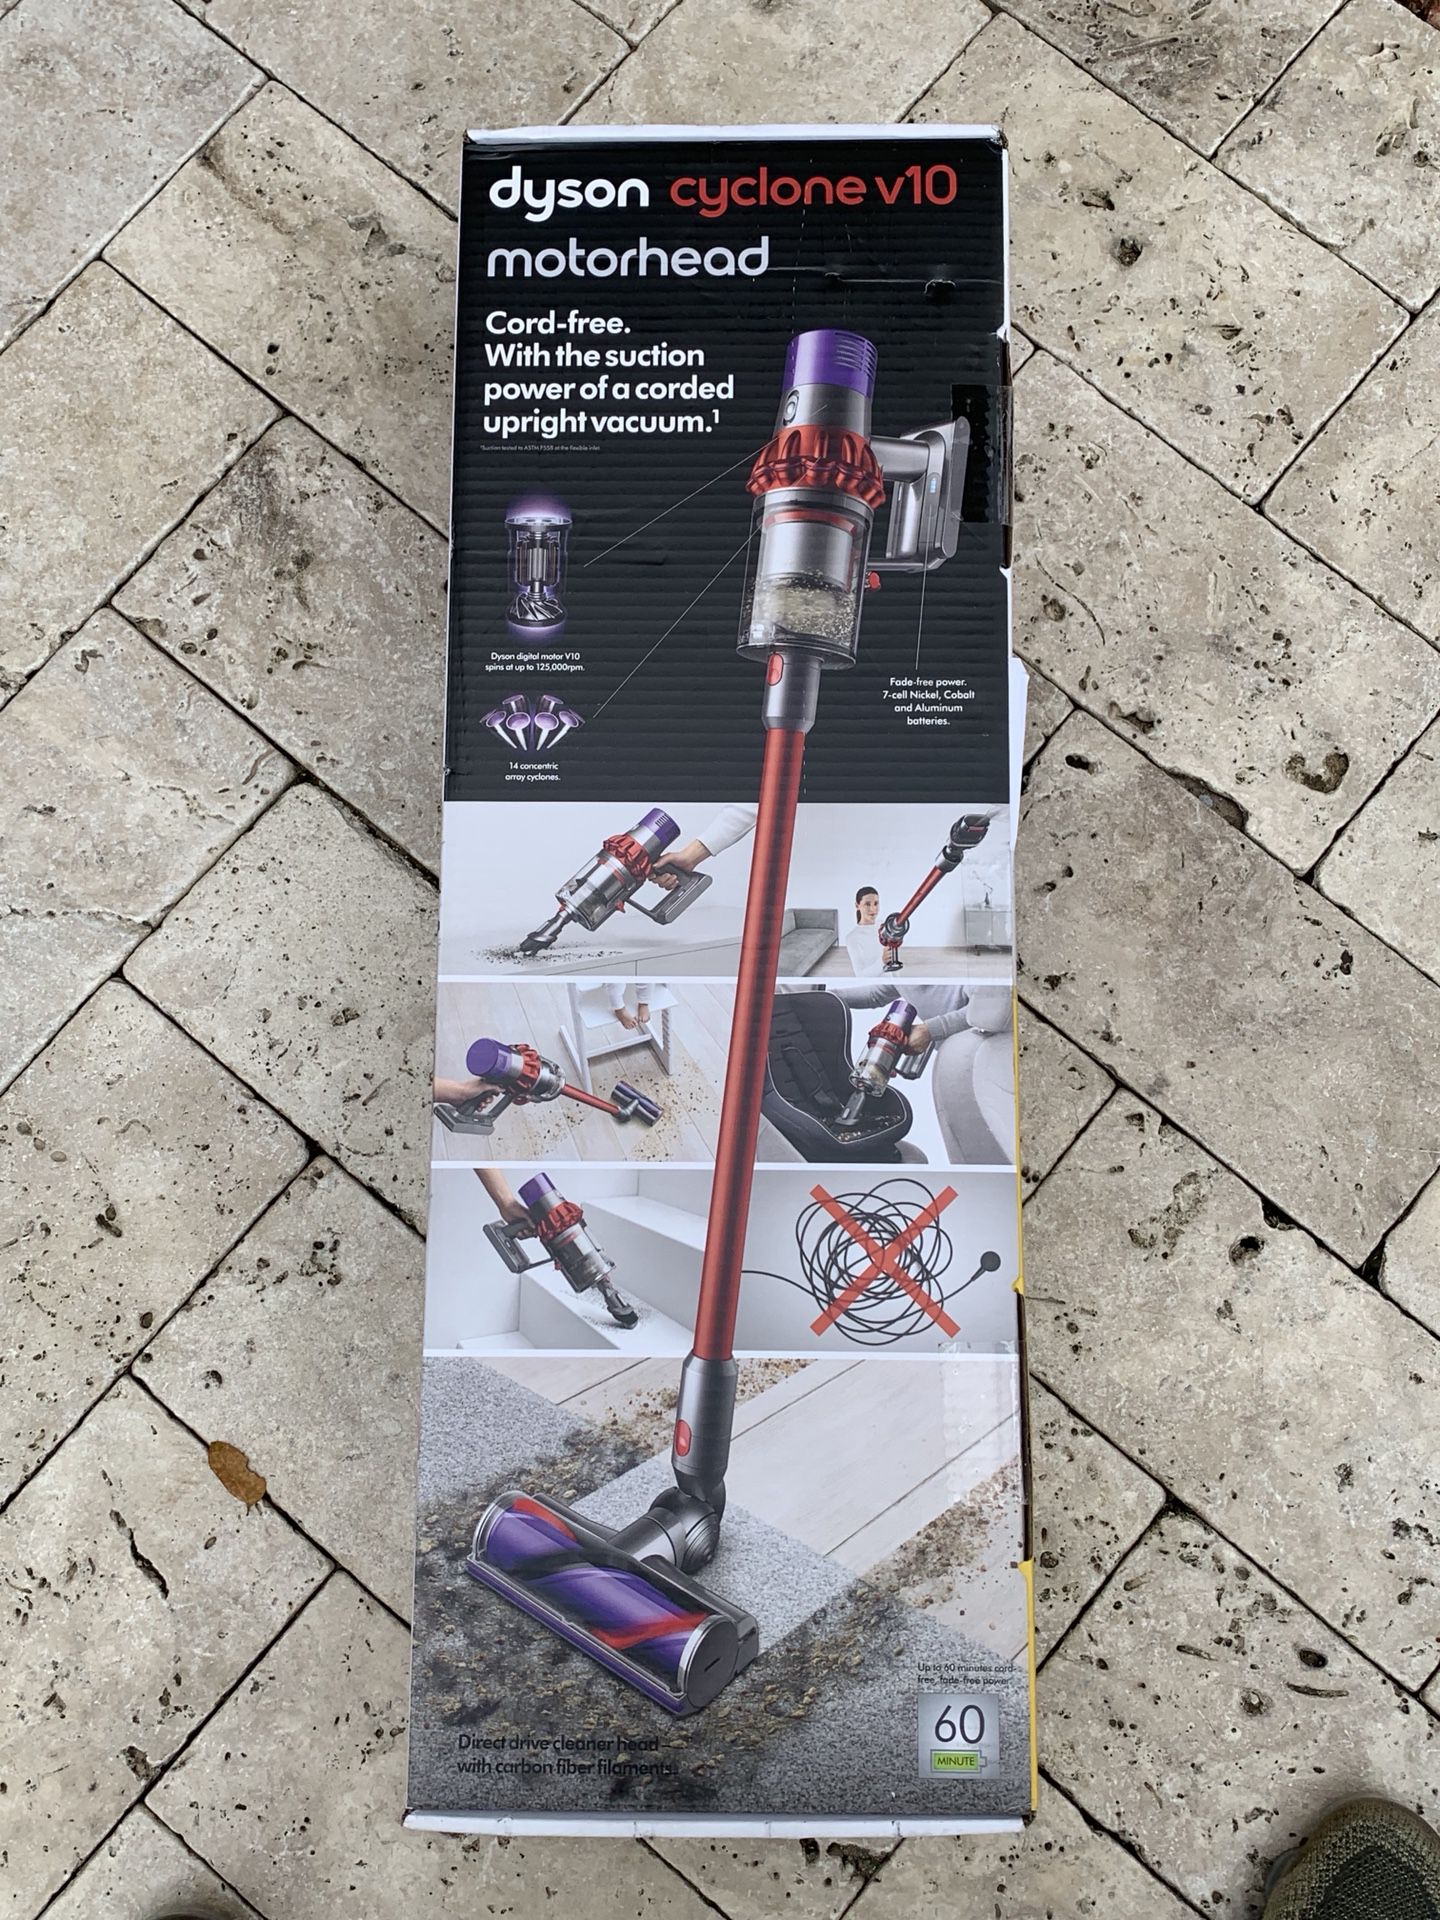 No Offers! New sealed Dyson v10 cyclone vacuum